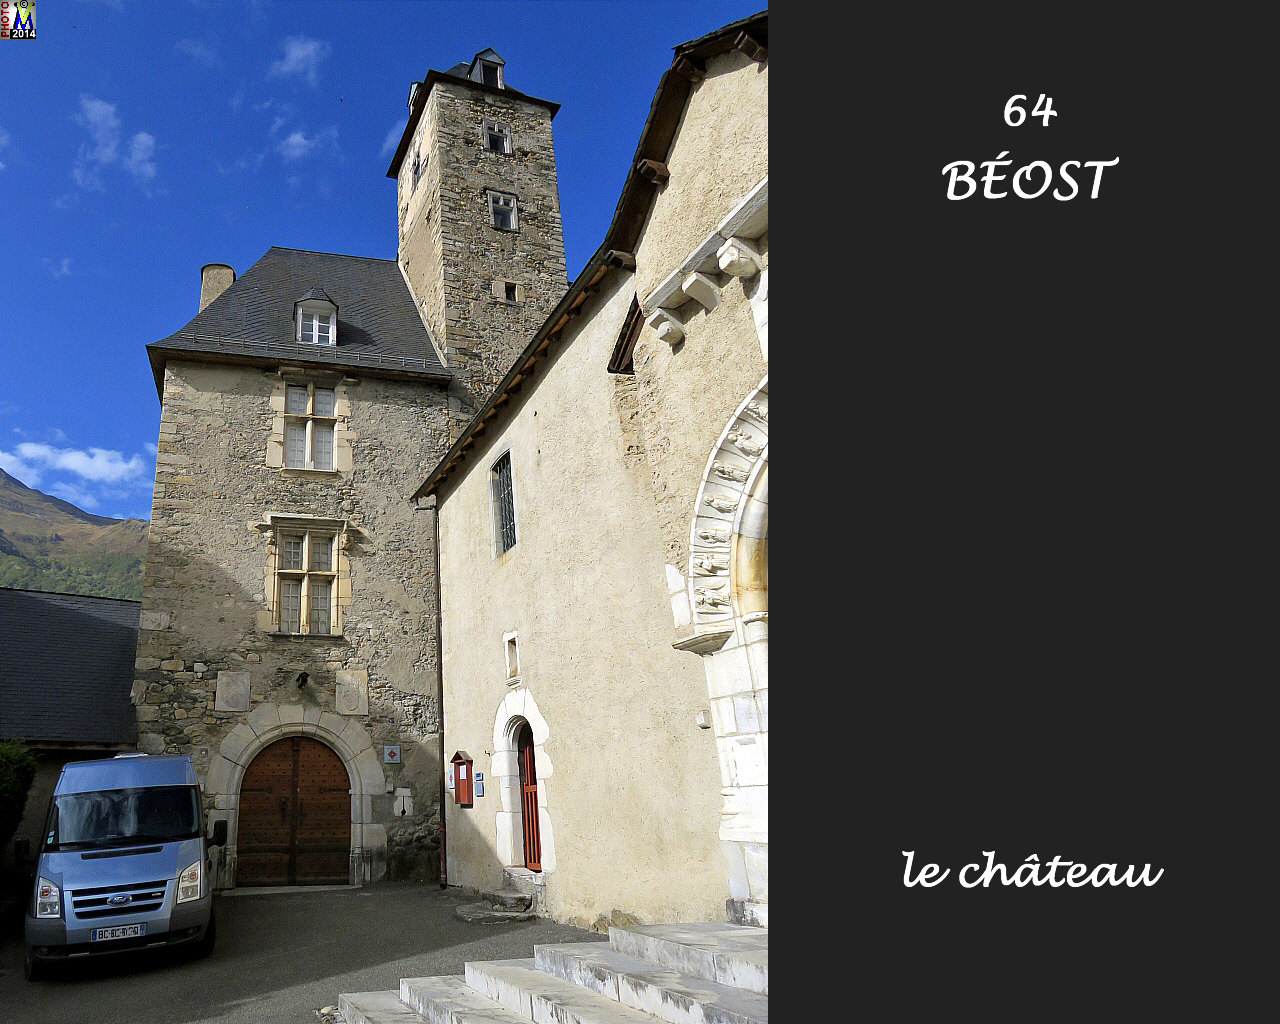 64BEOST_chateau_100.jpg